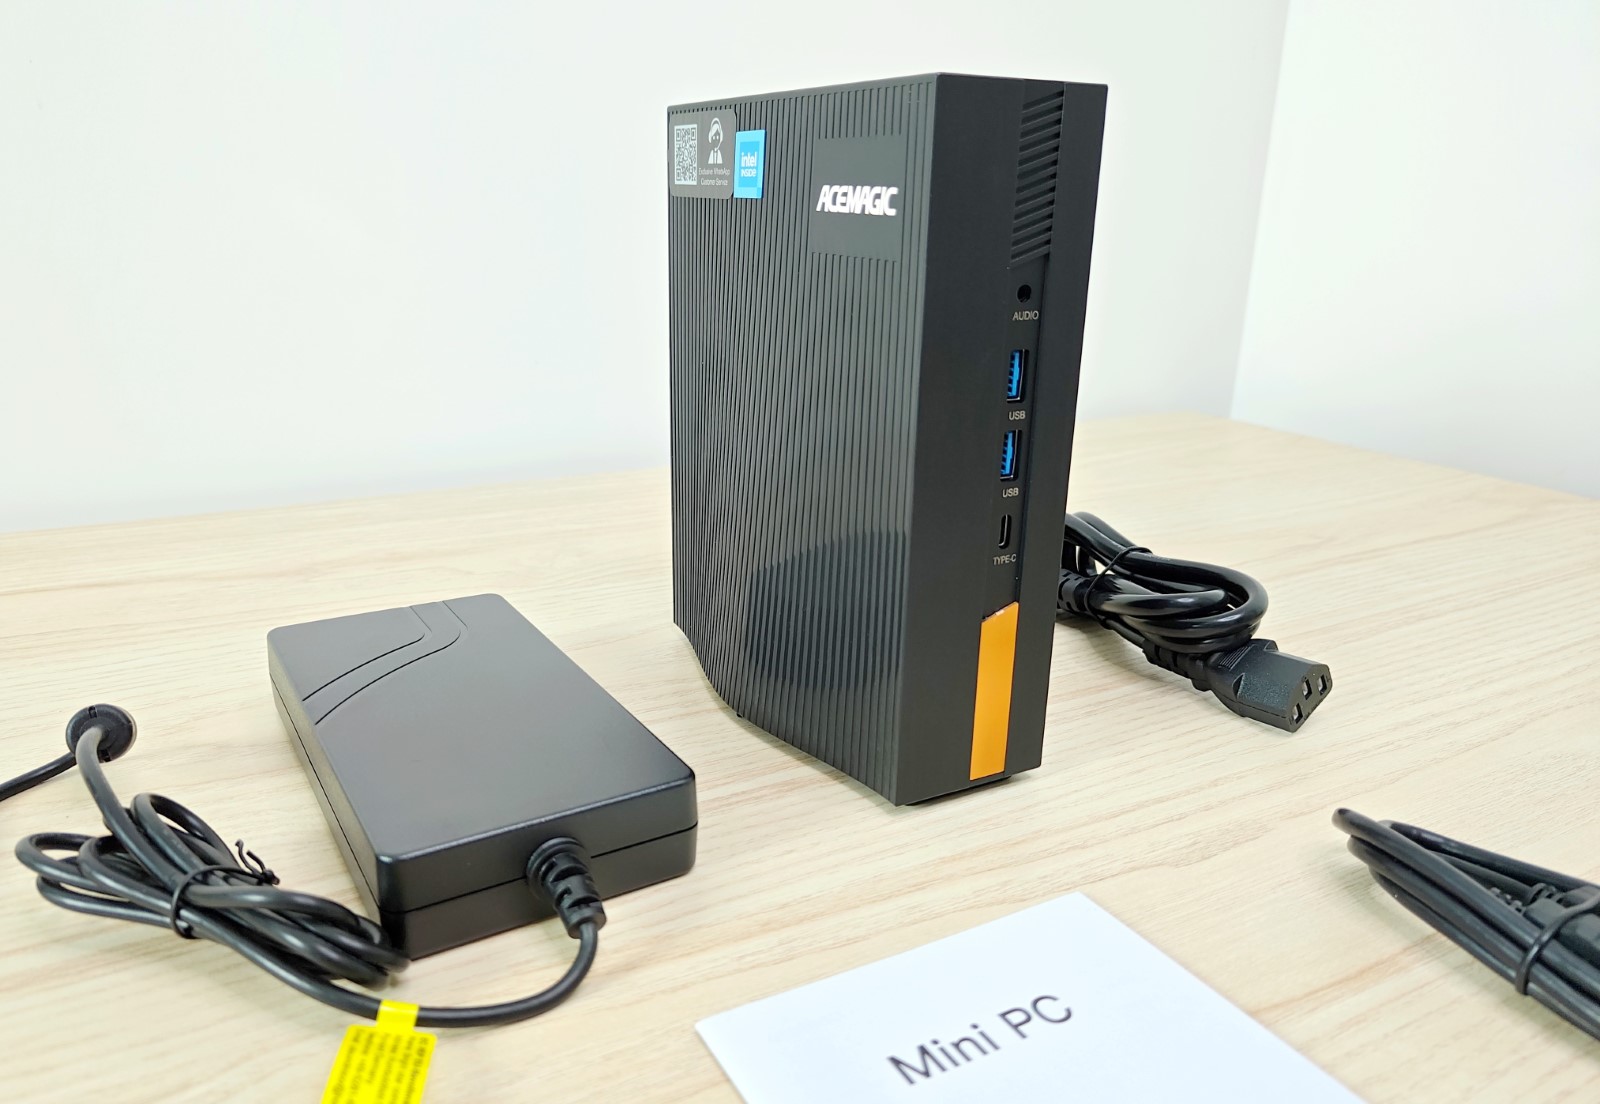 AceMagic AD15 Mini PC + Intel i7-11800H - Review & Benchmark 